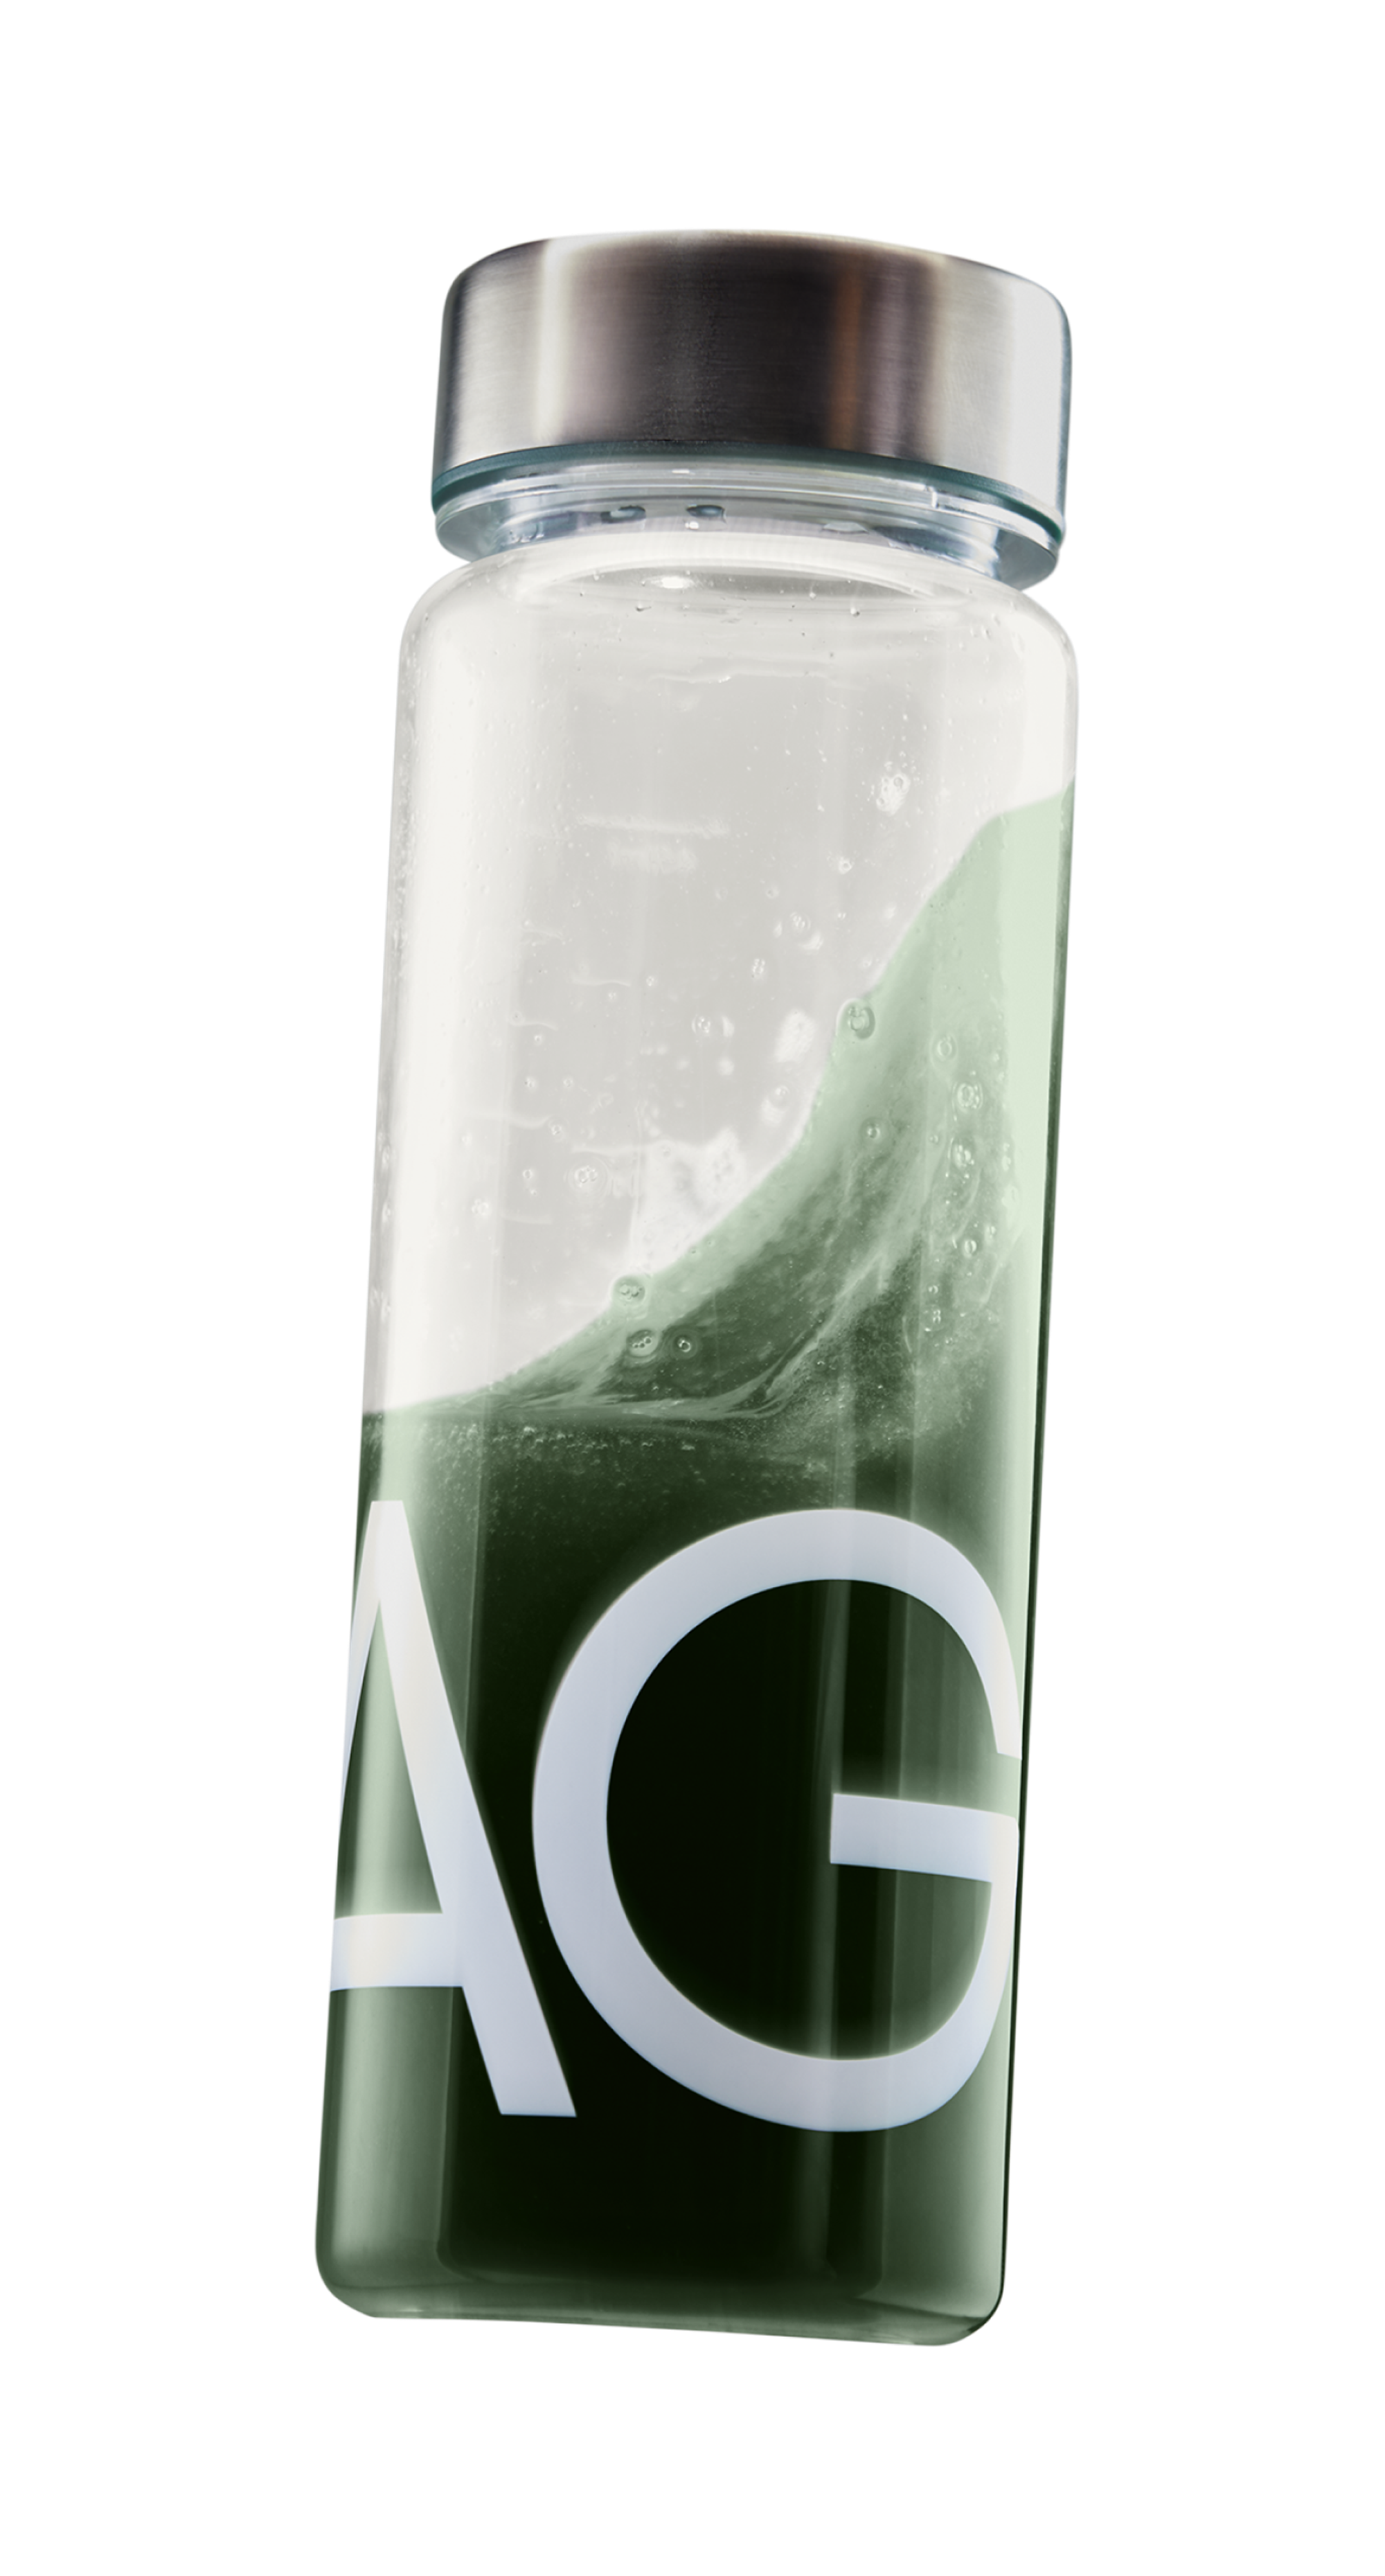 Athletic Greens AG1 450ML bottle & Container & Spoon